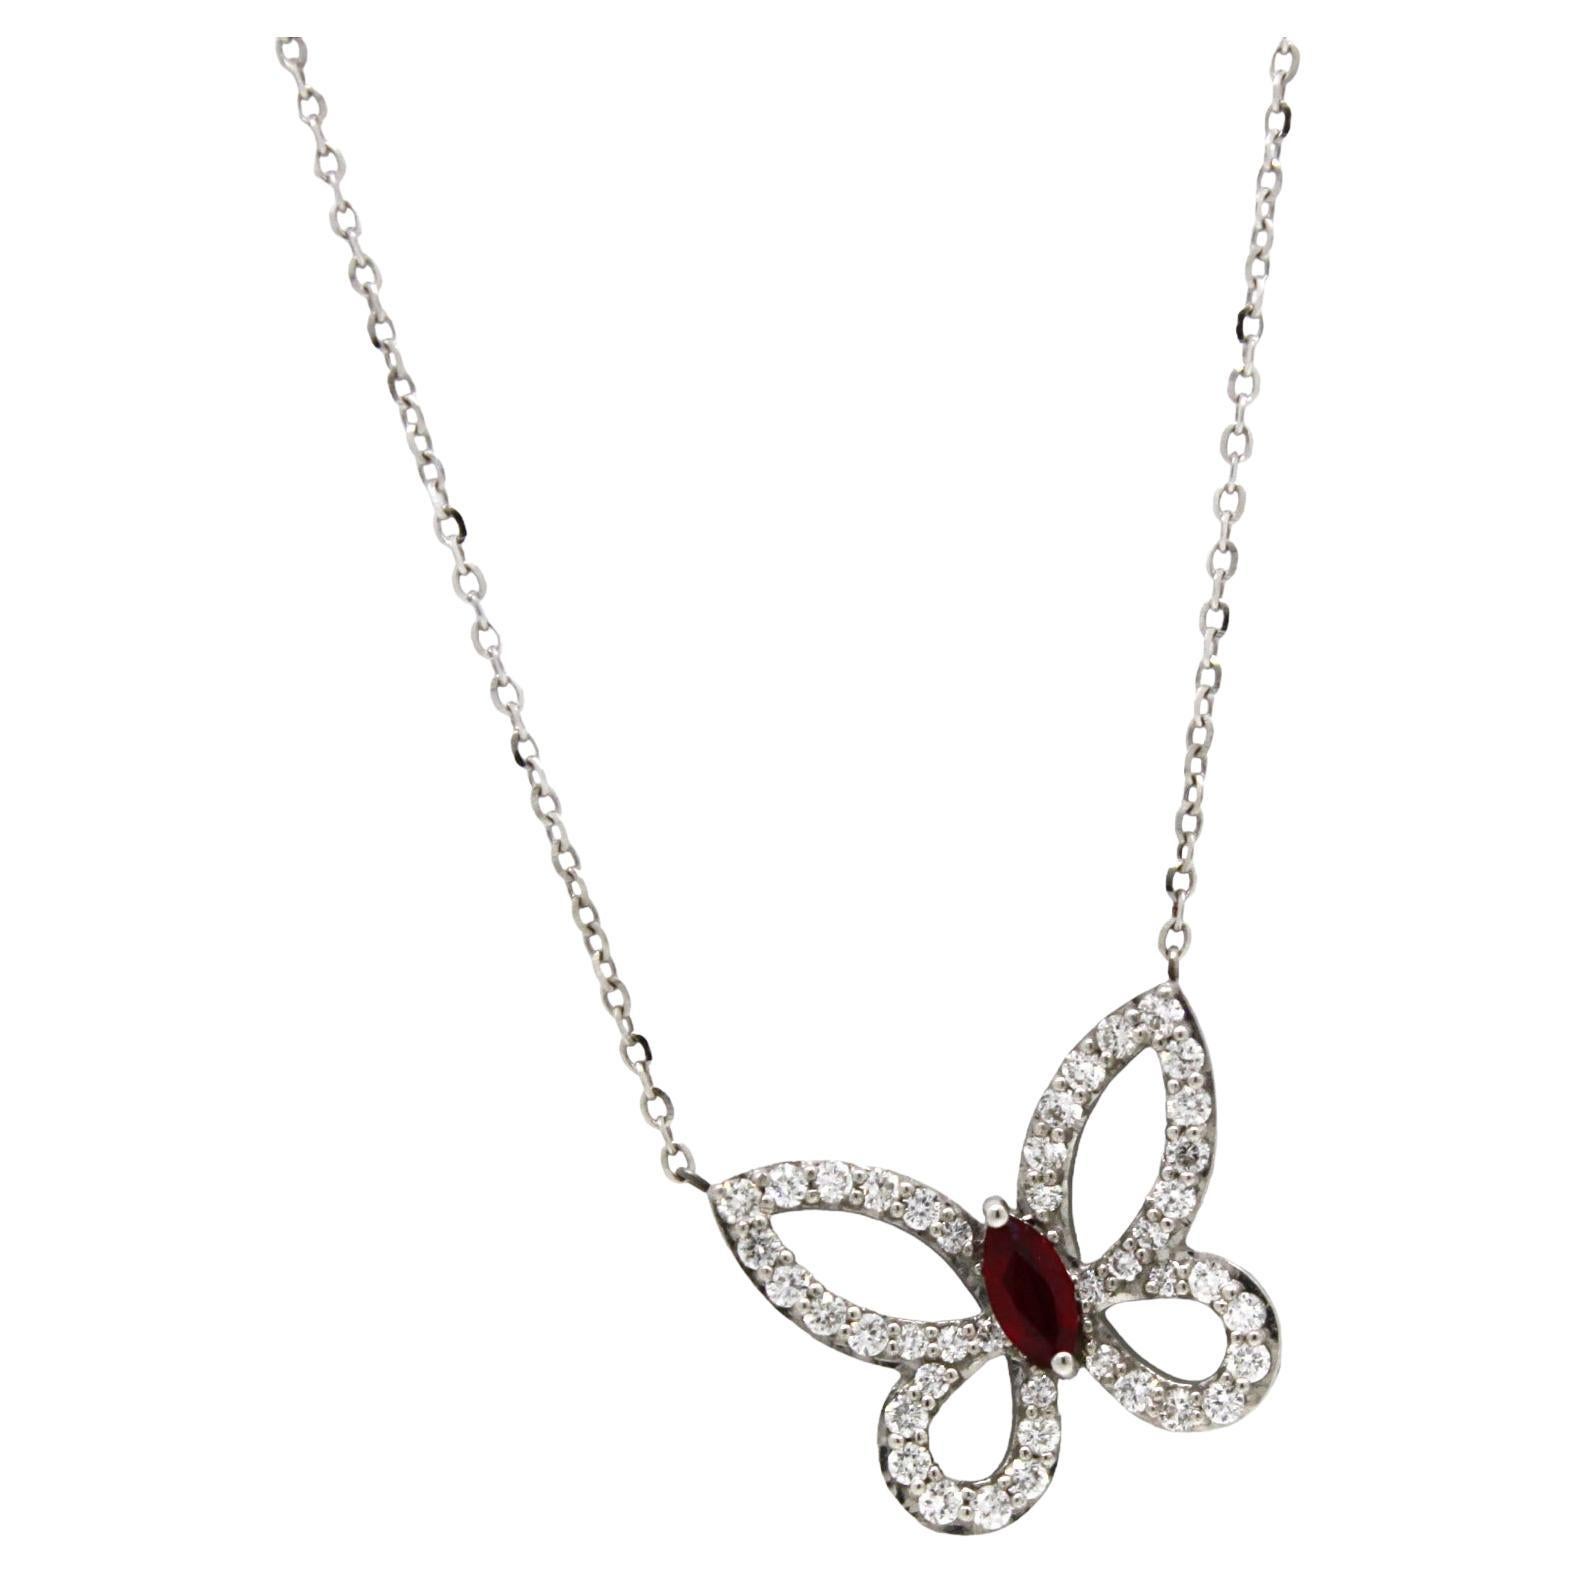 Radiant Ruby Butterfly, a Stunning Diamond-Accented Pendant Necklace